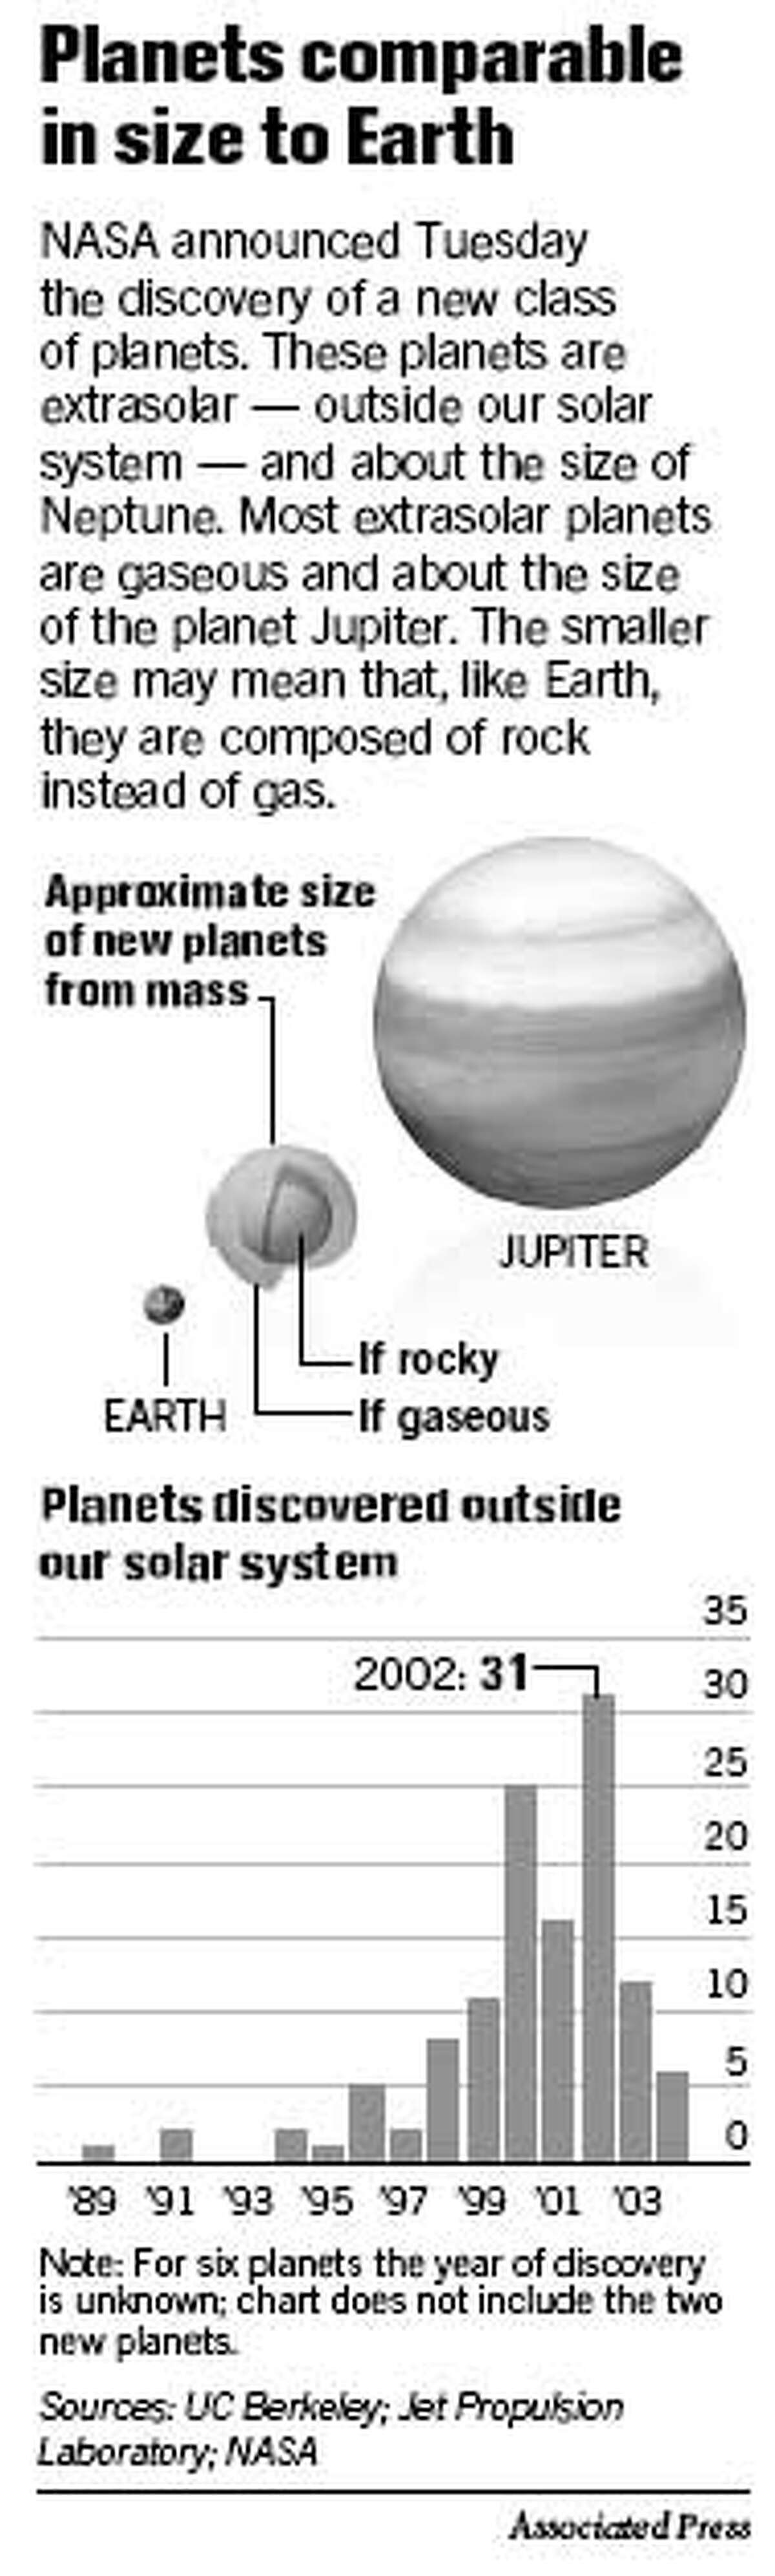 Planets Comparable in Size to Earth. Associated Press Graphic